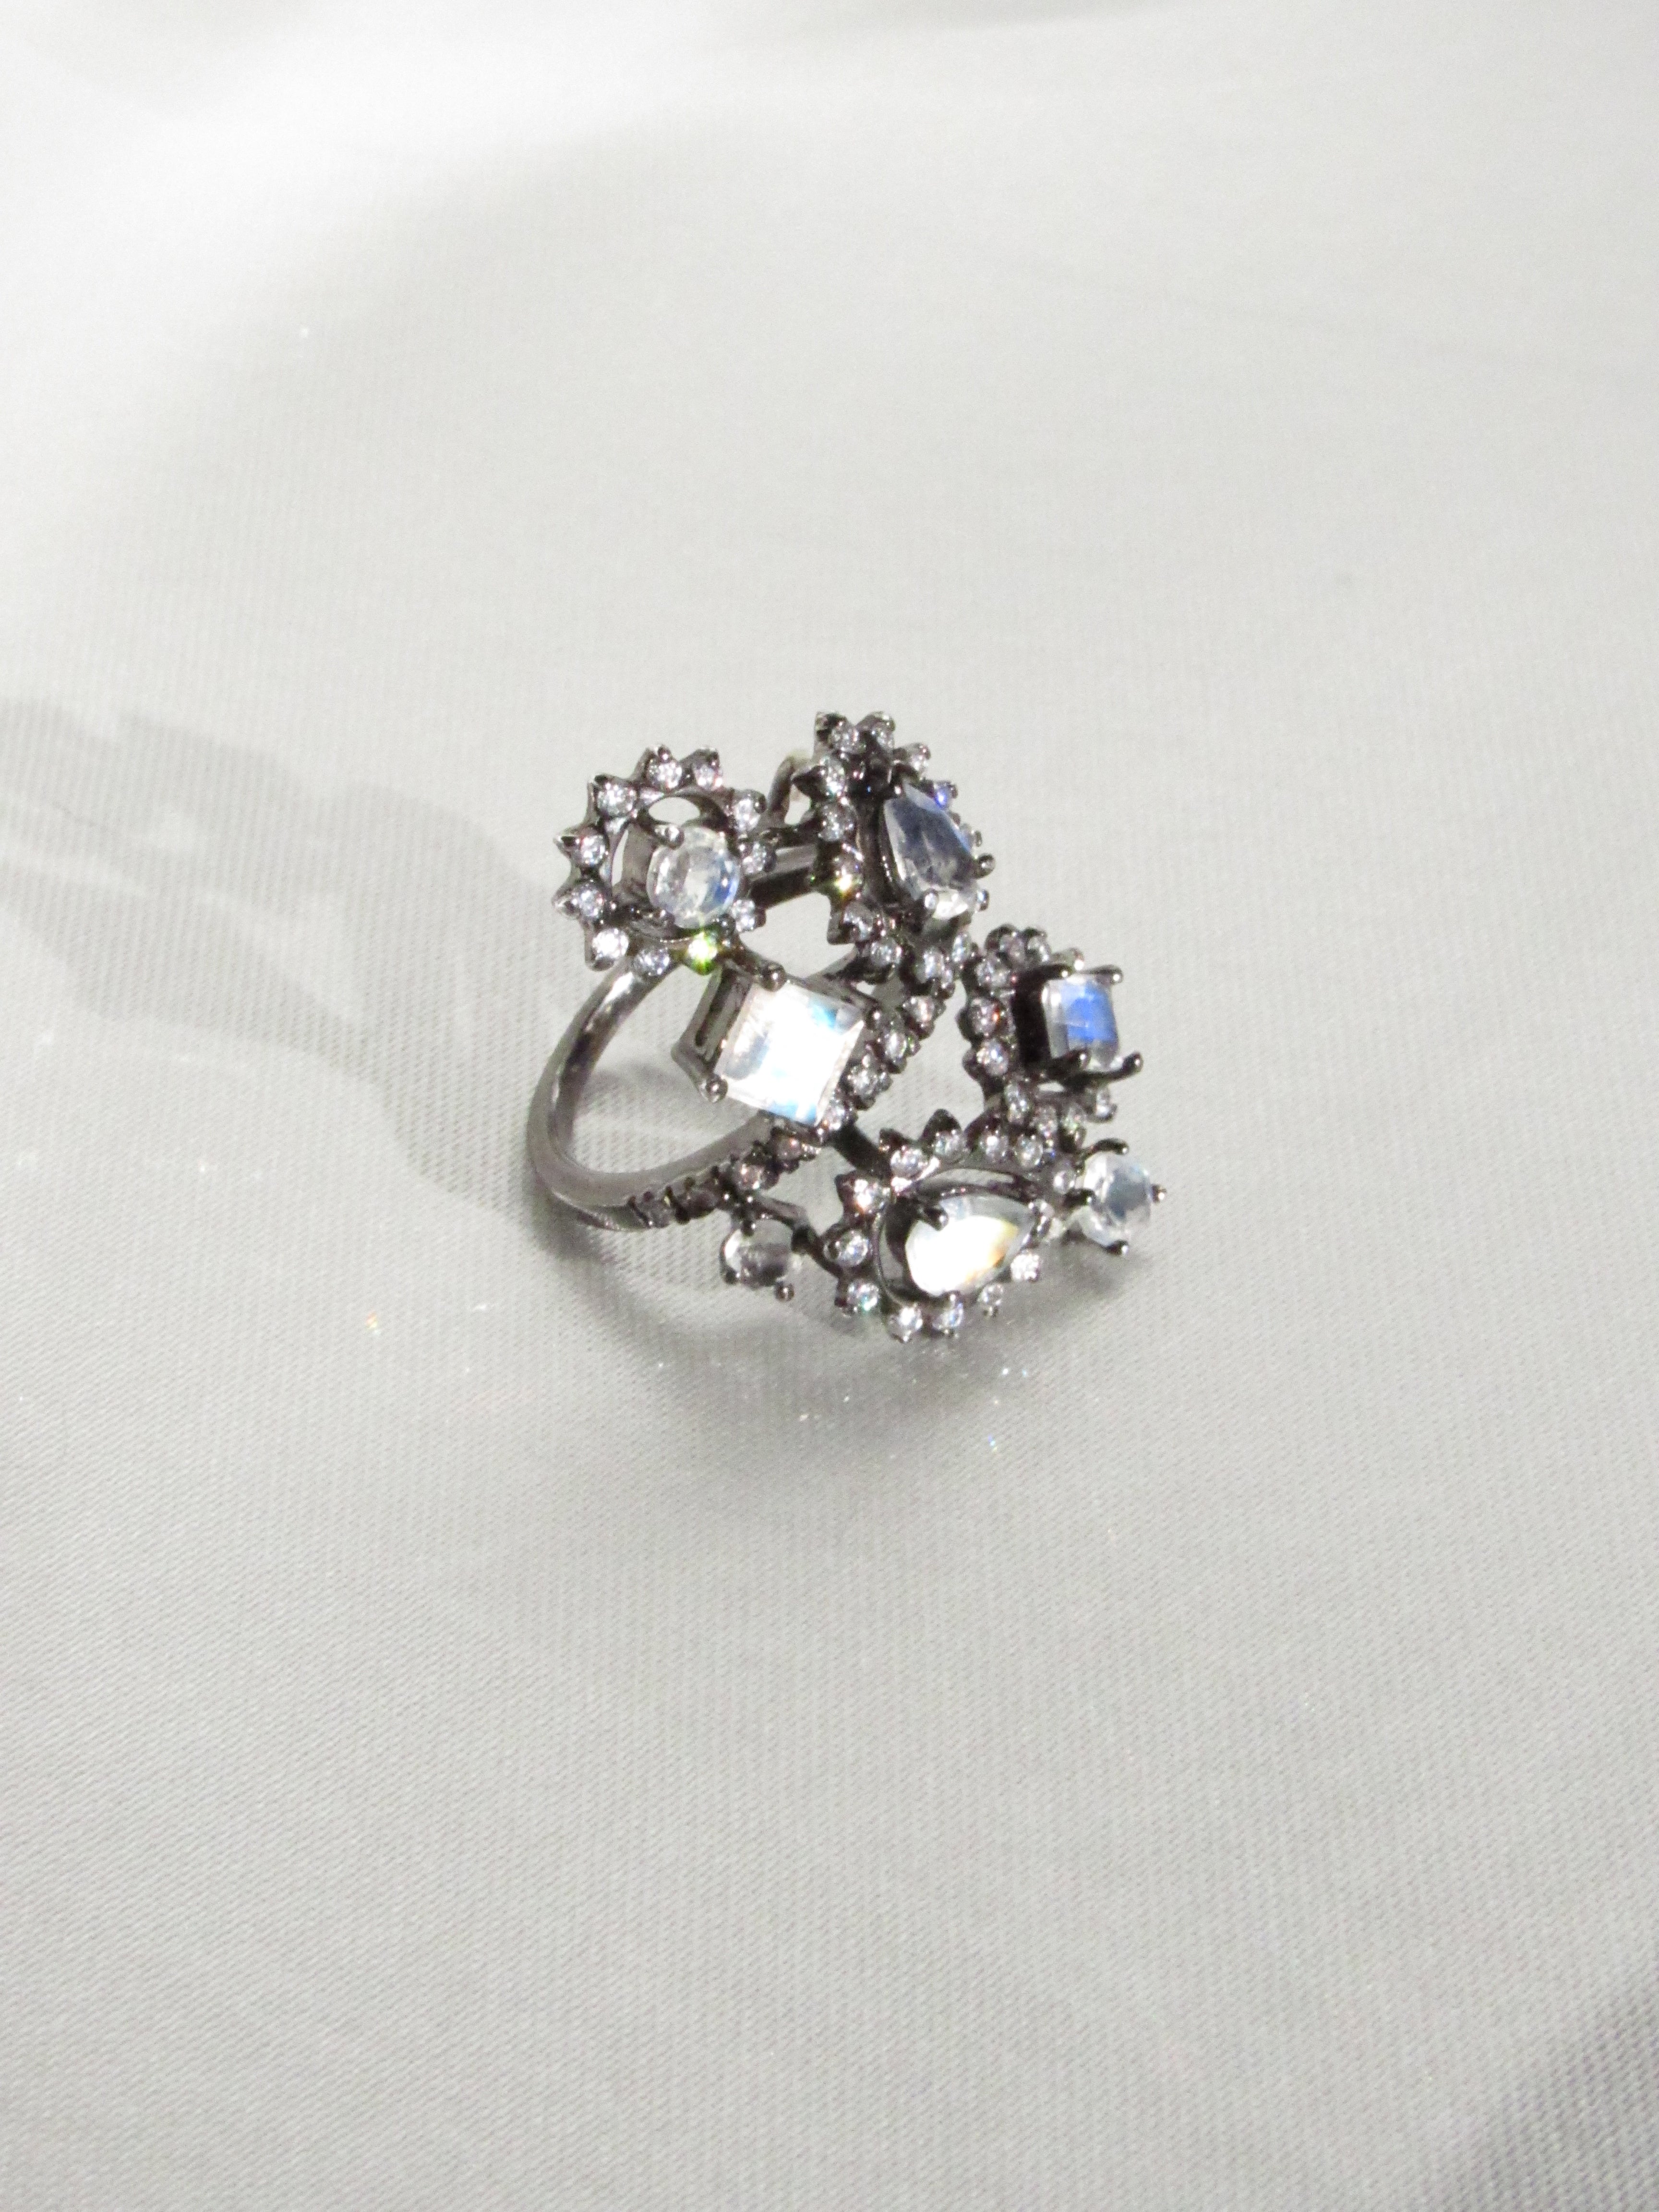 Iridescent Blue Moonstone Cocktail Ring